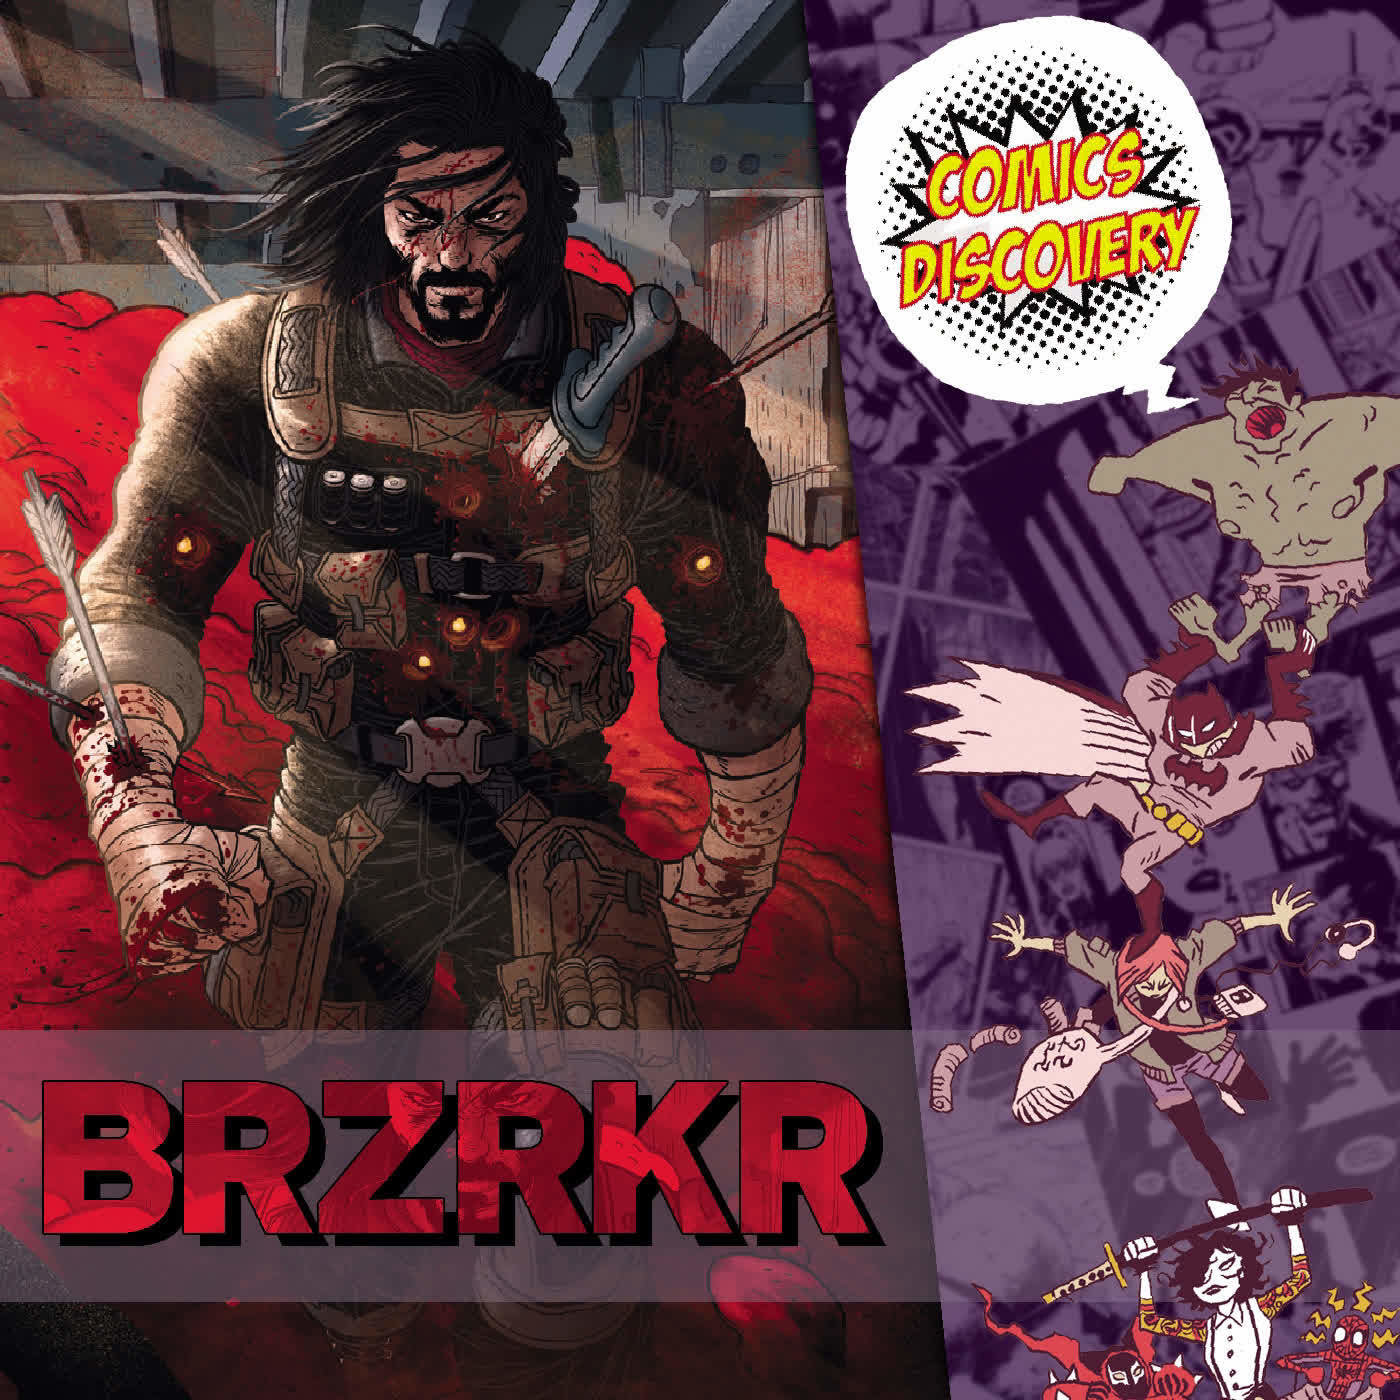 ComicsDiscovery Review : BRZRKR